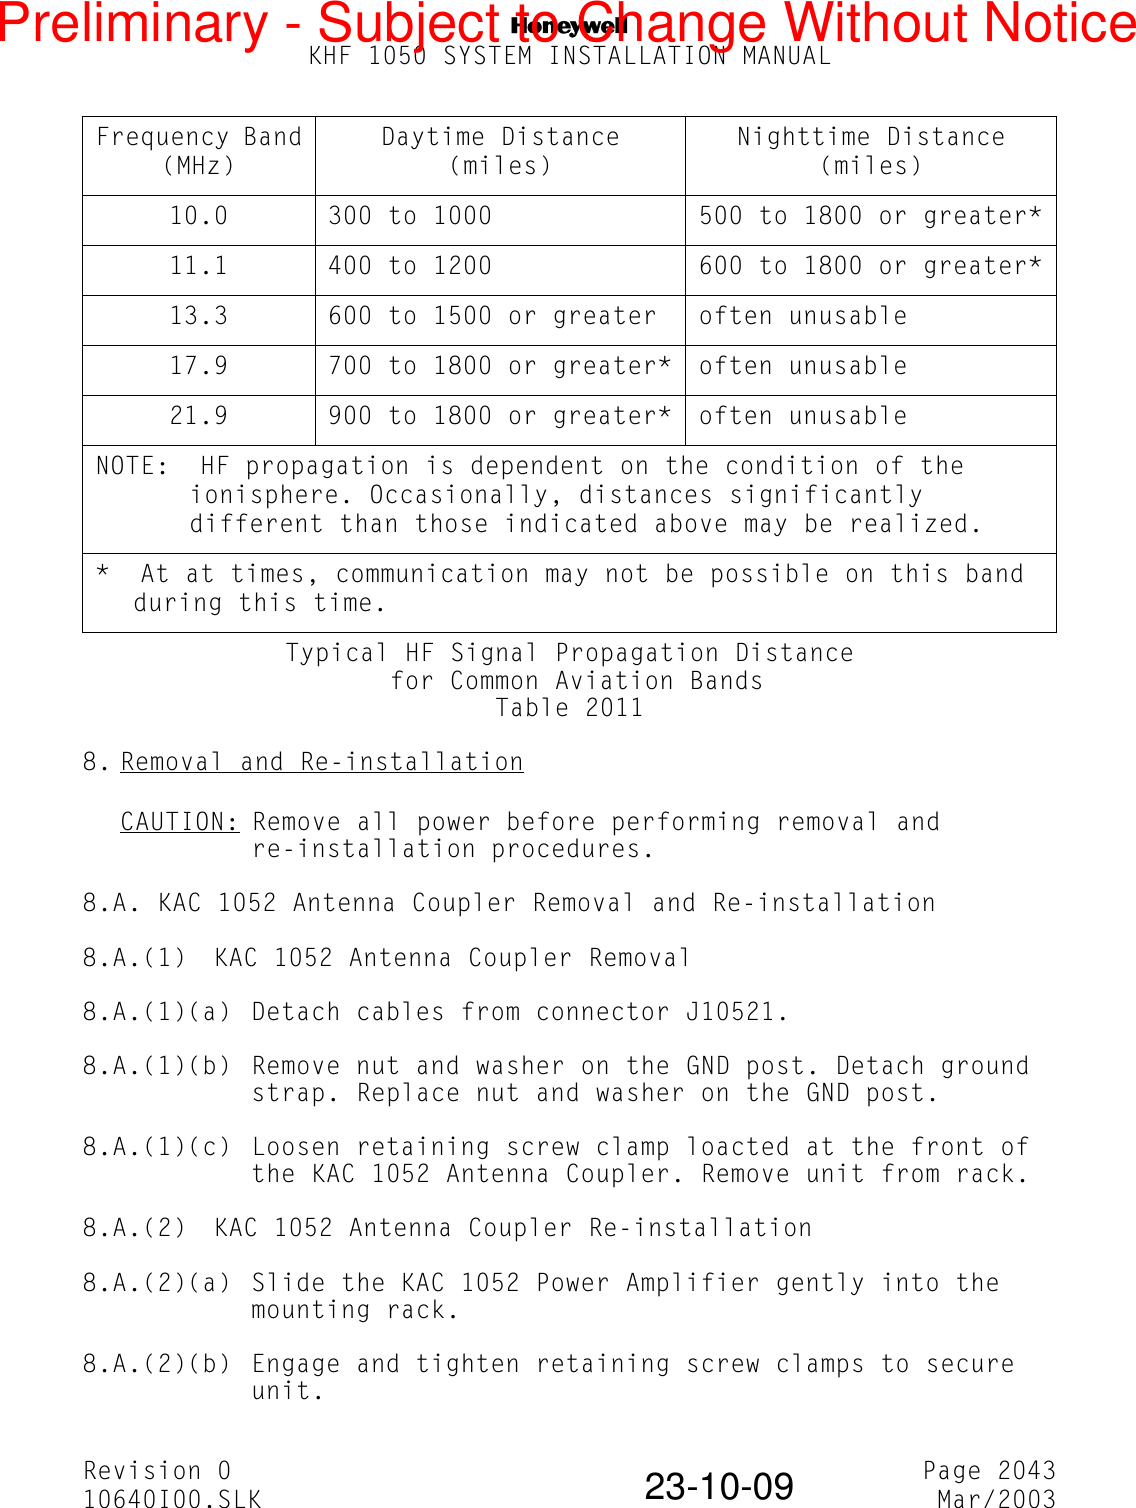 NKHF 1050 SYSTEM INSTALLATION MANUALRevision 0 Page 204310640I00.SLK Mar/200323-10-09Typical HF Signal Propagation Distance for Common Aviation BandsTable 20118. Removal and Re-installationCAUTION: Remove all power before performing removal and re-installation procedures.8.A. KAC 1052 Antenna Coupler Removal and Re-installation8.A.(1) KAC 1052 Antenna Coupler Removal8.A.(1)(a) Detach cables from connector J10521.8.A.(1)(b) Remove nut and washer on the GND post. Detach ground strap. Replace nut and washer on the GND post.8.A.(1)(c) Loosen retaining screw clamp loacted at the front of the KAC 1052 Antenna Coupler. Remove unit from rack.8.A.(2) KAC 1052 Antenna Coupler Re-installation8.A.(2)(a) Slide the KAC 1052 Power Amplifier gently into the mounting rack.8.A.(2)(b) Engage and tighten retaining screw clamps to secure unit.10.0 300 to 1000 500 to 1800 or greater*11.1 400 to 1200 600 to 1800 or greater*13.3 600 to 1500 or greater often unusable17.9 700 to 1800 or greater* often unusable21.9 900 to 1800 or greater* often unusableNOTE:  HF propagation is dependent on the condition of the ionisphere. Occasionally, distances significantly different than those indicated above may be realized.*  At at times, communication may not be possible on this band during this time.Frequency Band(MHz)Daytime Distance(miles)Nighttime Distance(miles)Preliminary - Subject to Change Without Notice